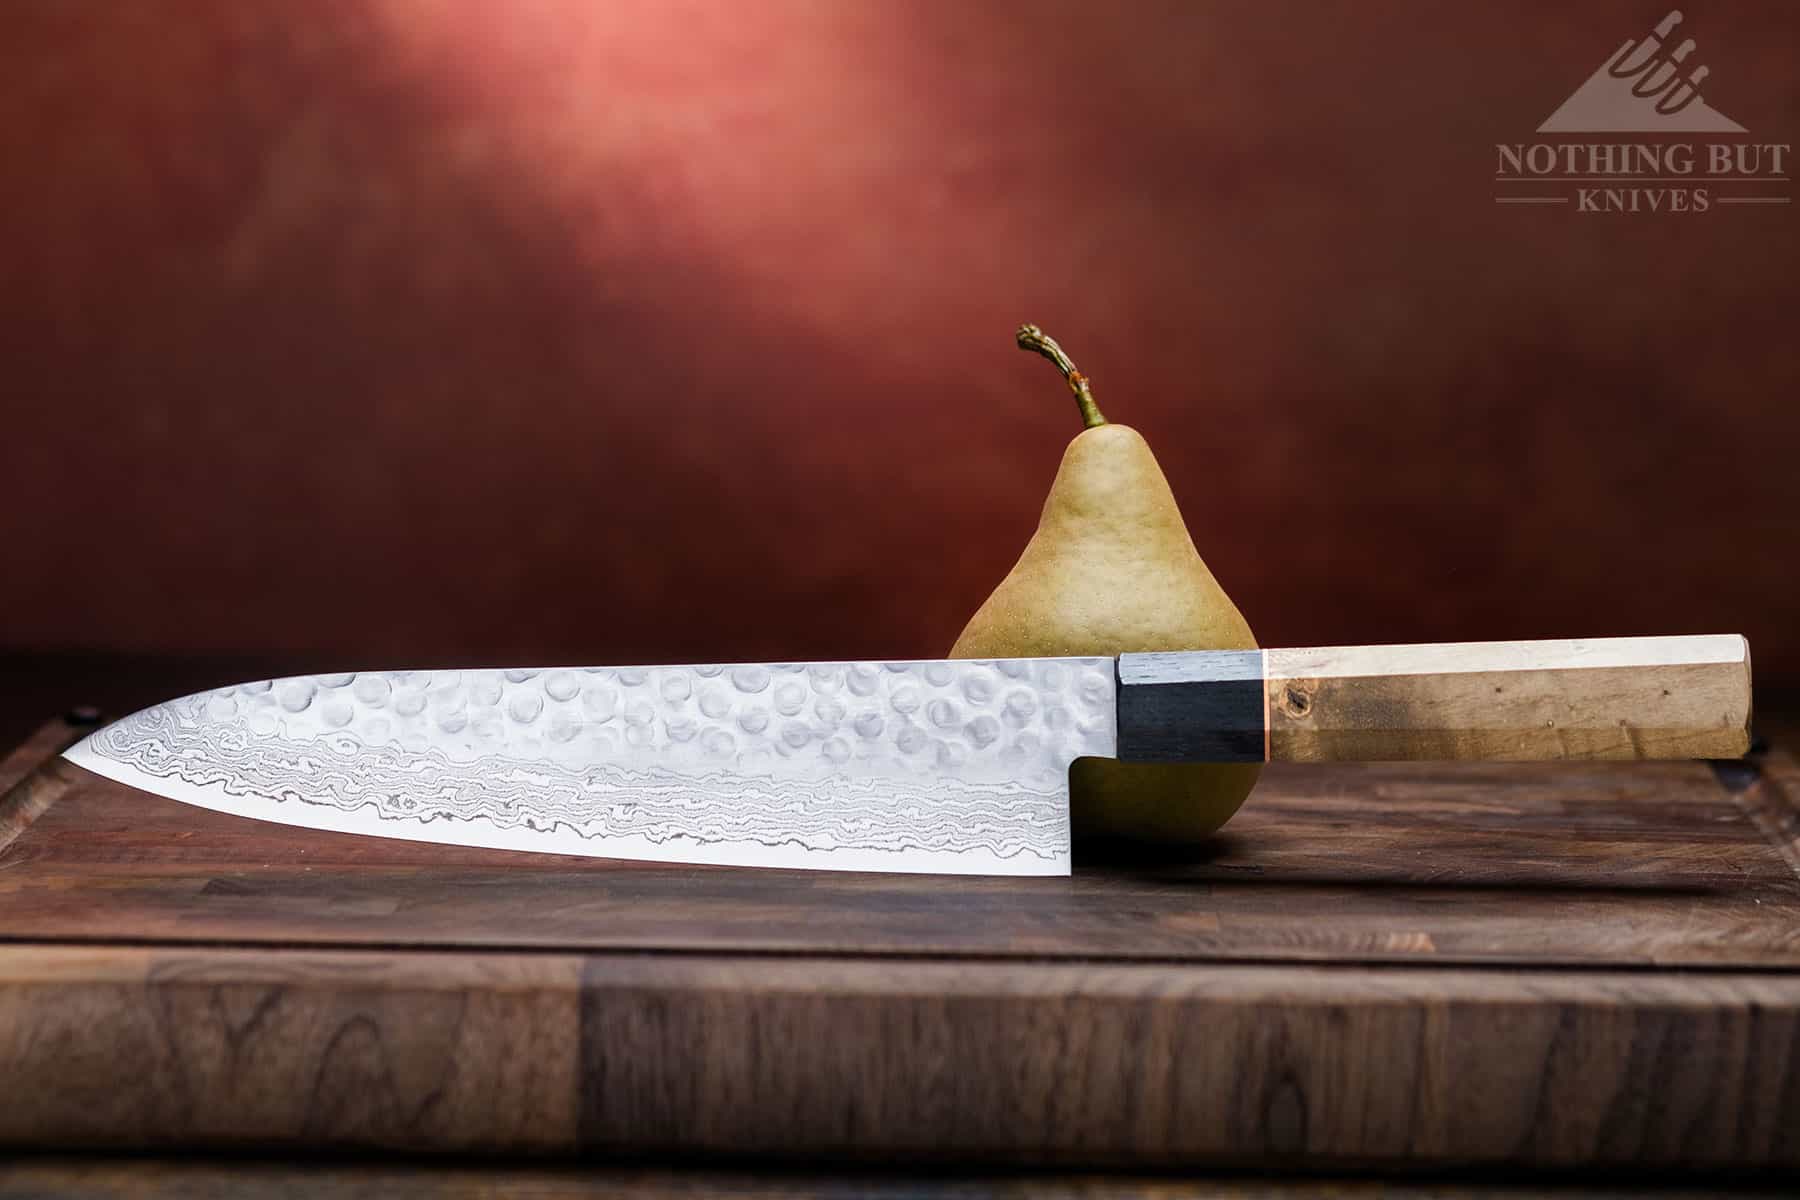 Are Japanese Carving Knives As Good As The Western Ones? - Oishya